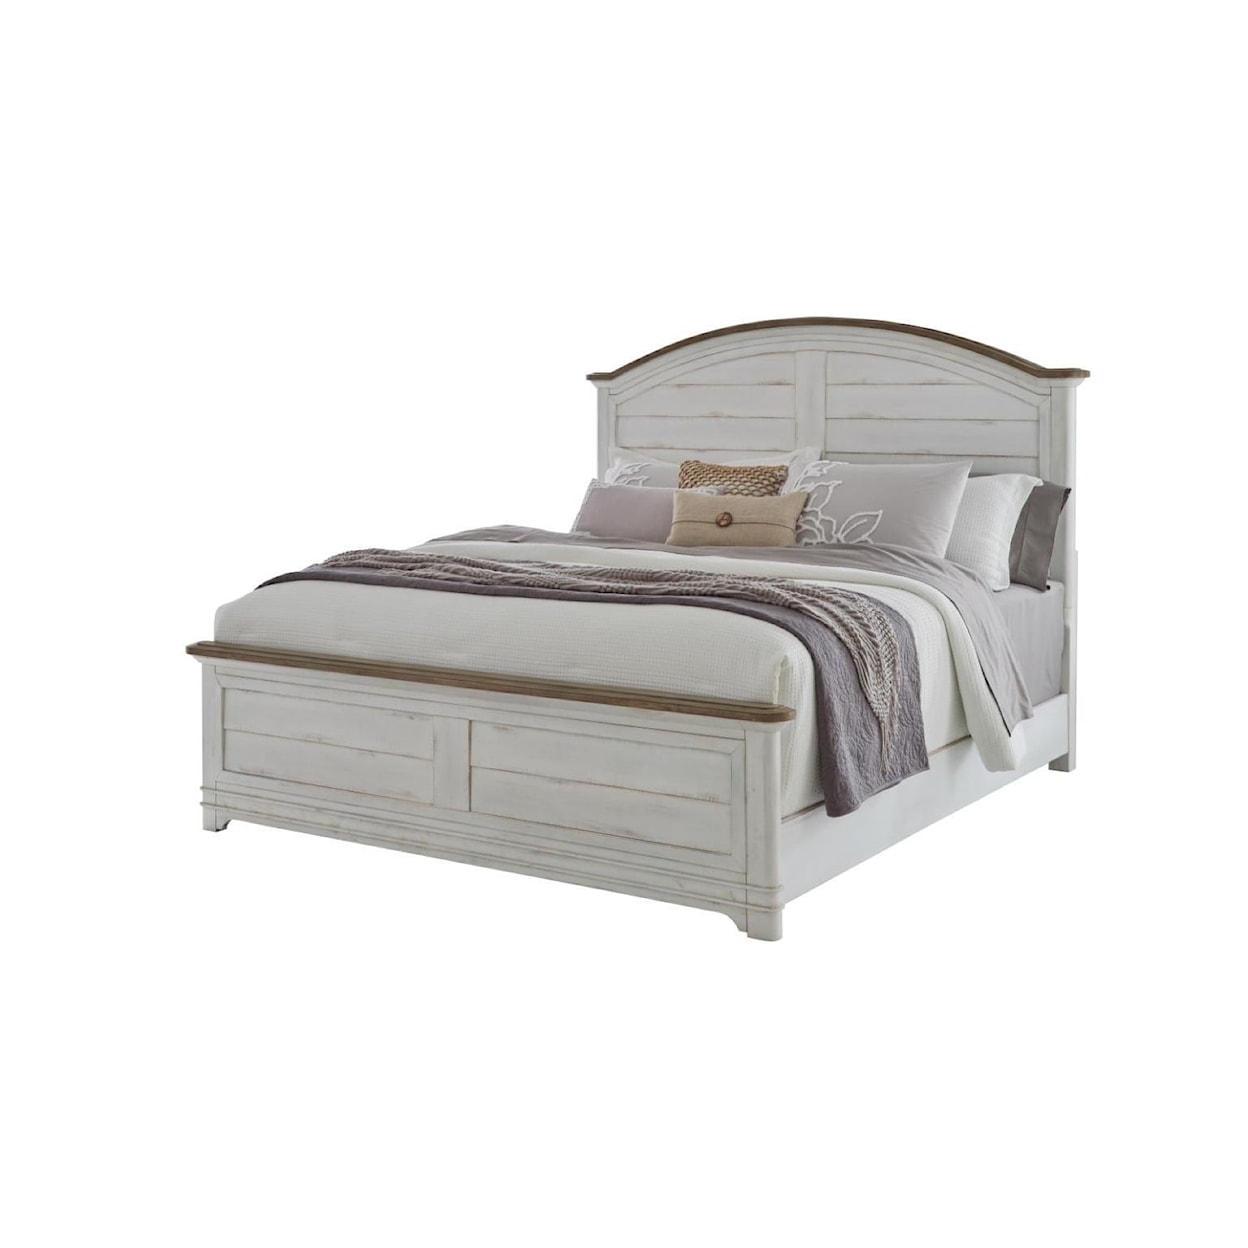 American Woodcrafters Meadowbrook Queen Arched Panel Bed